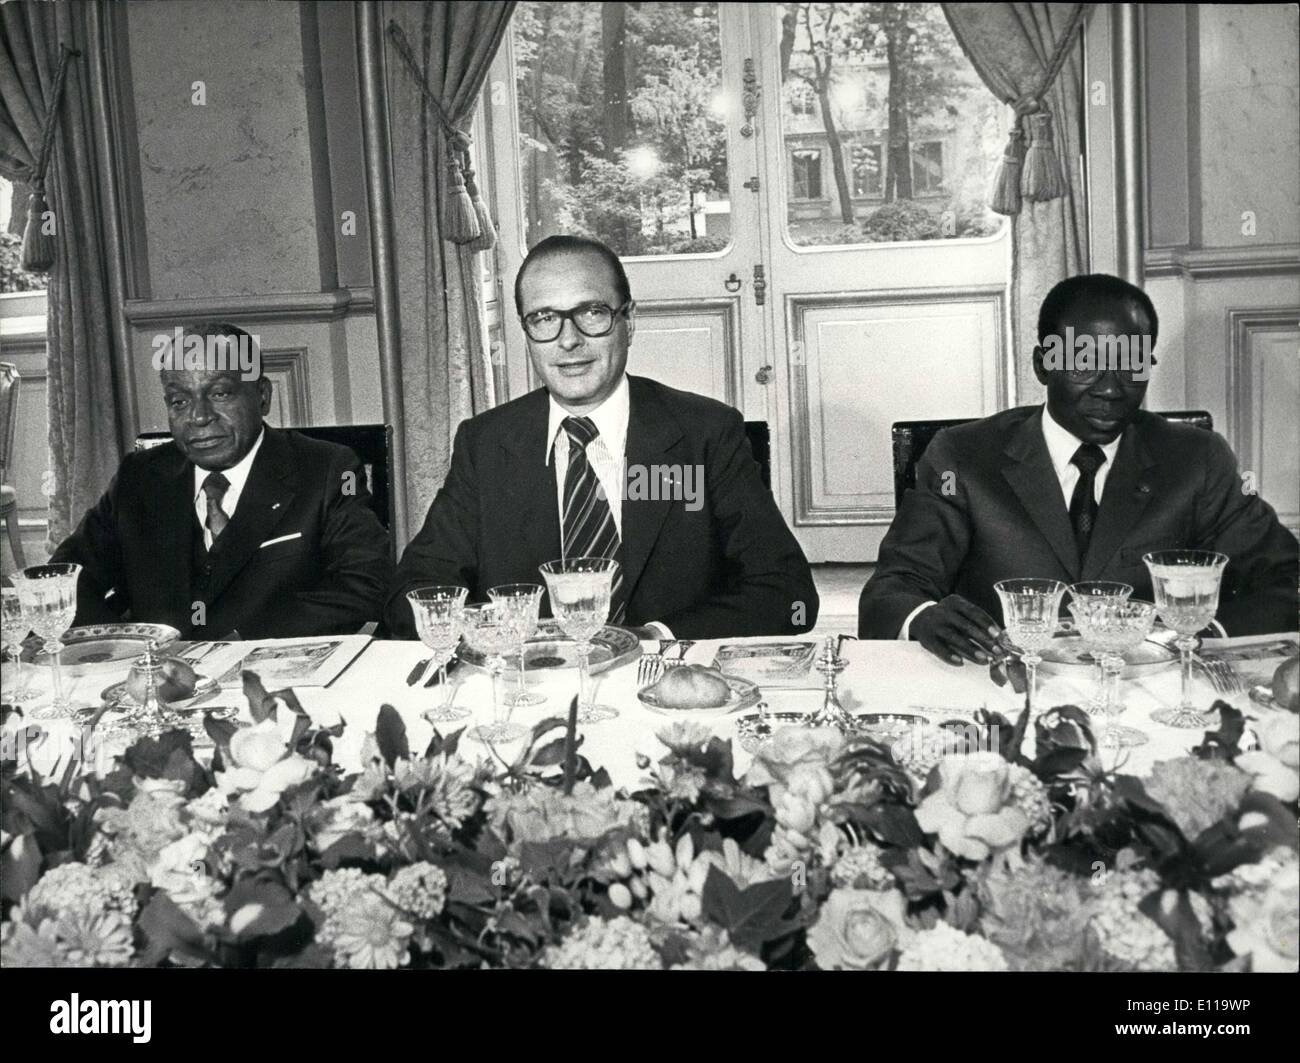 May 10, 1976 - Left to right: President of the Ivory Coast Houphouet-Boigny, Jacques Chirac, and Senegal's President Leopold Senghor. Stock Photo